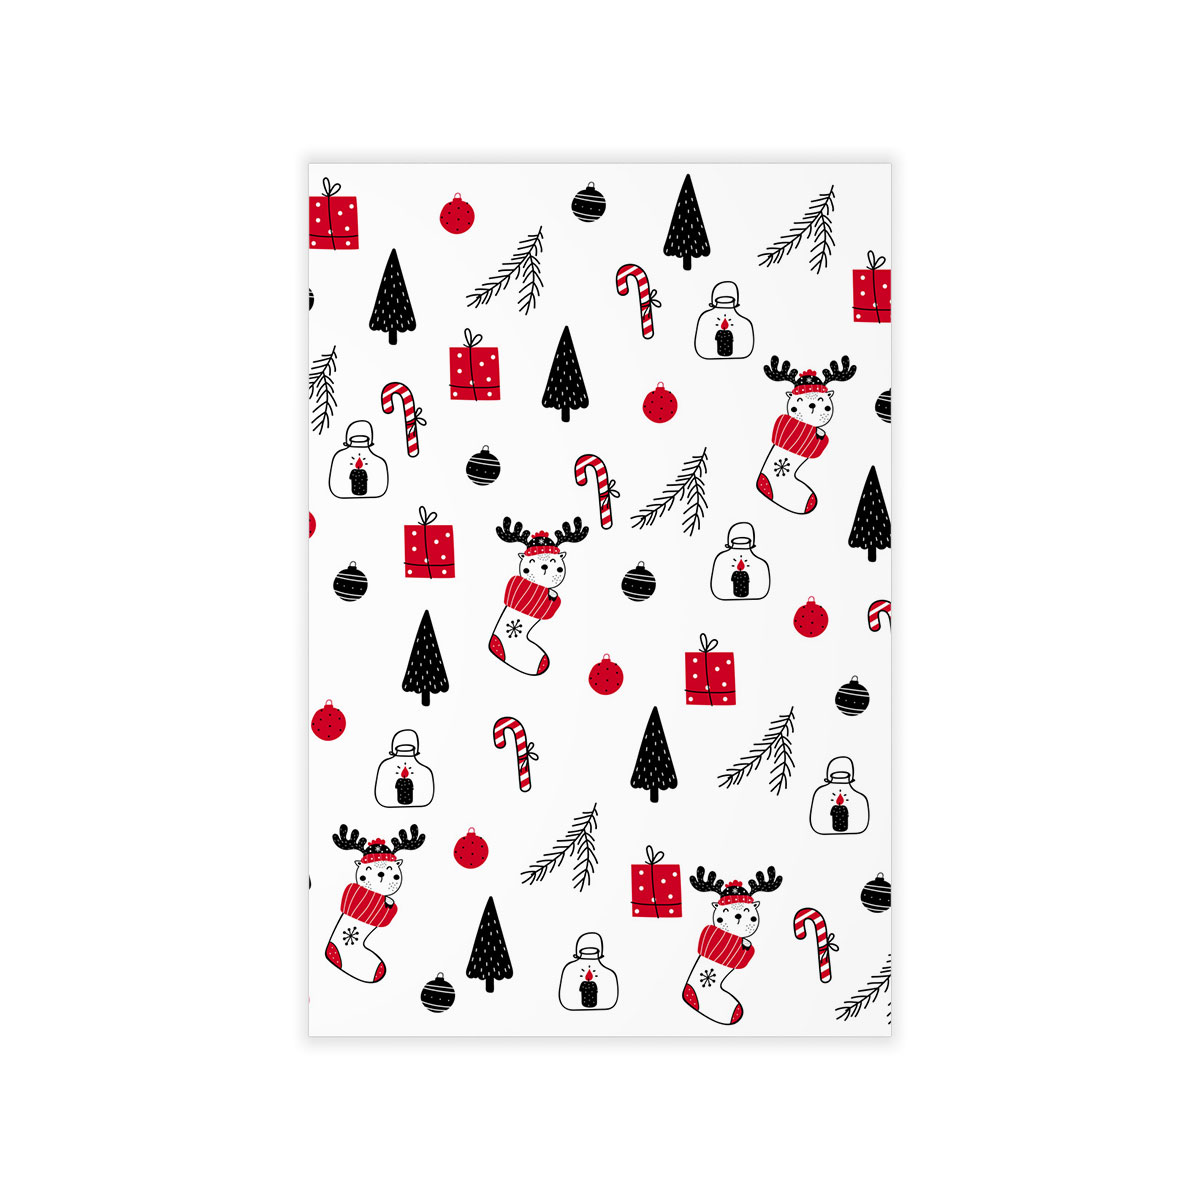 Reindeer Clipart In Hand Drawn Red Socks, Christmas Balls, Candy Canes, And Christmas Gifts Seamless White Pattern Wall Decals